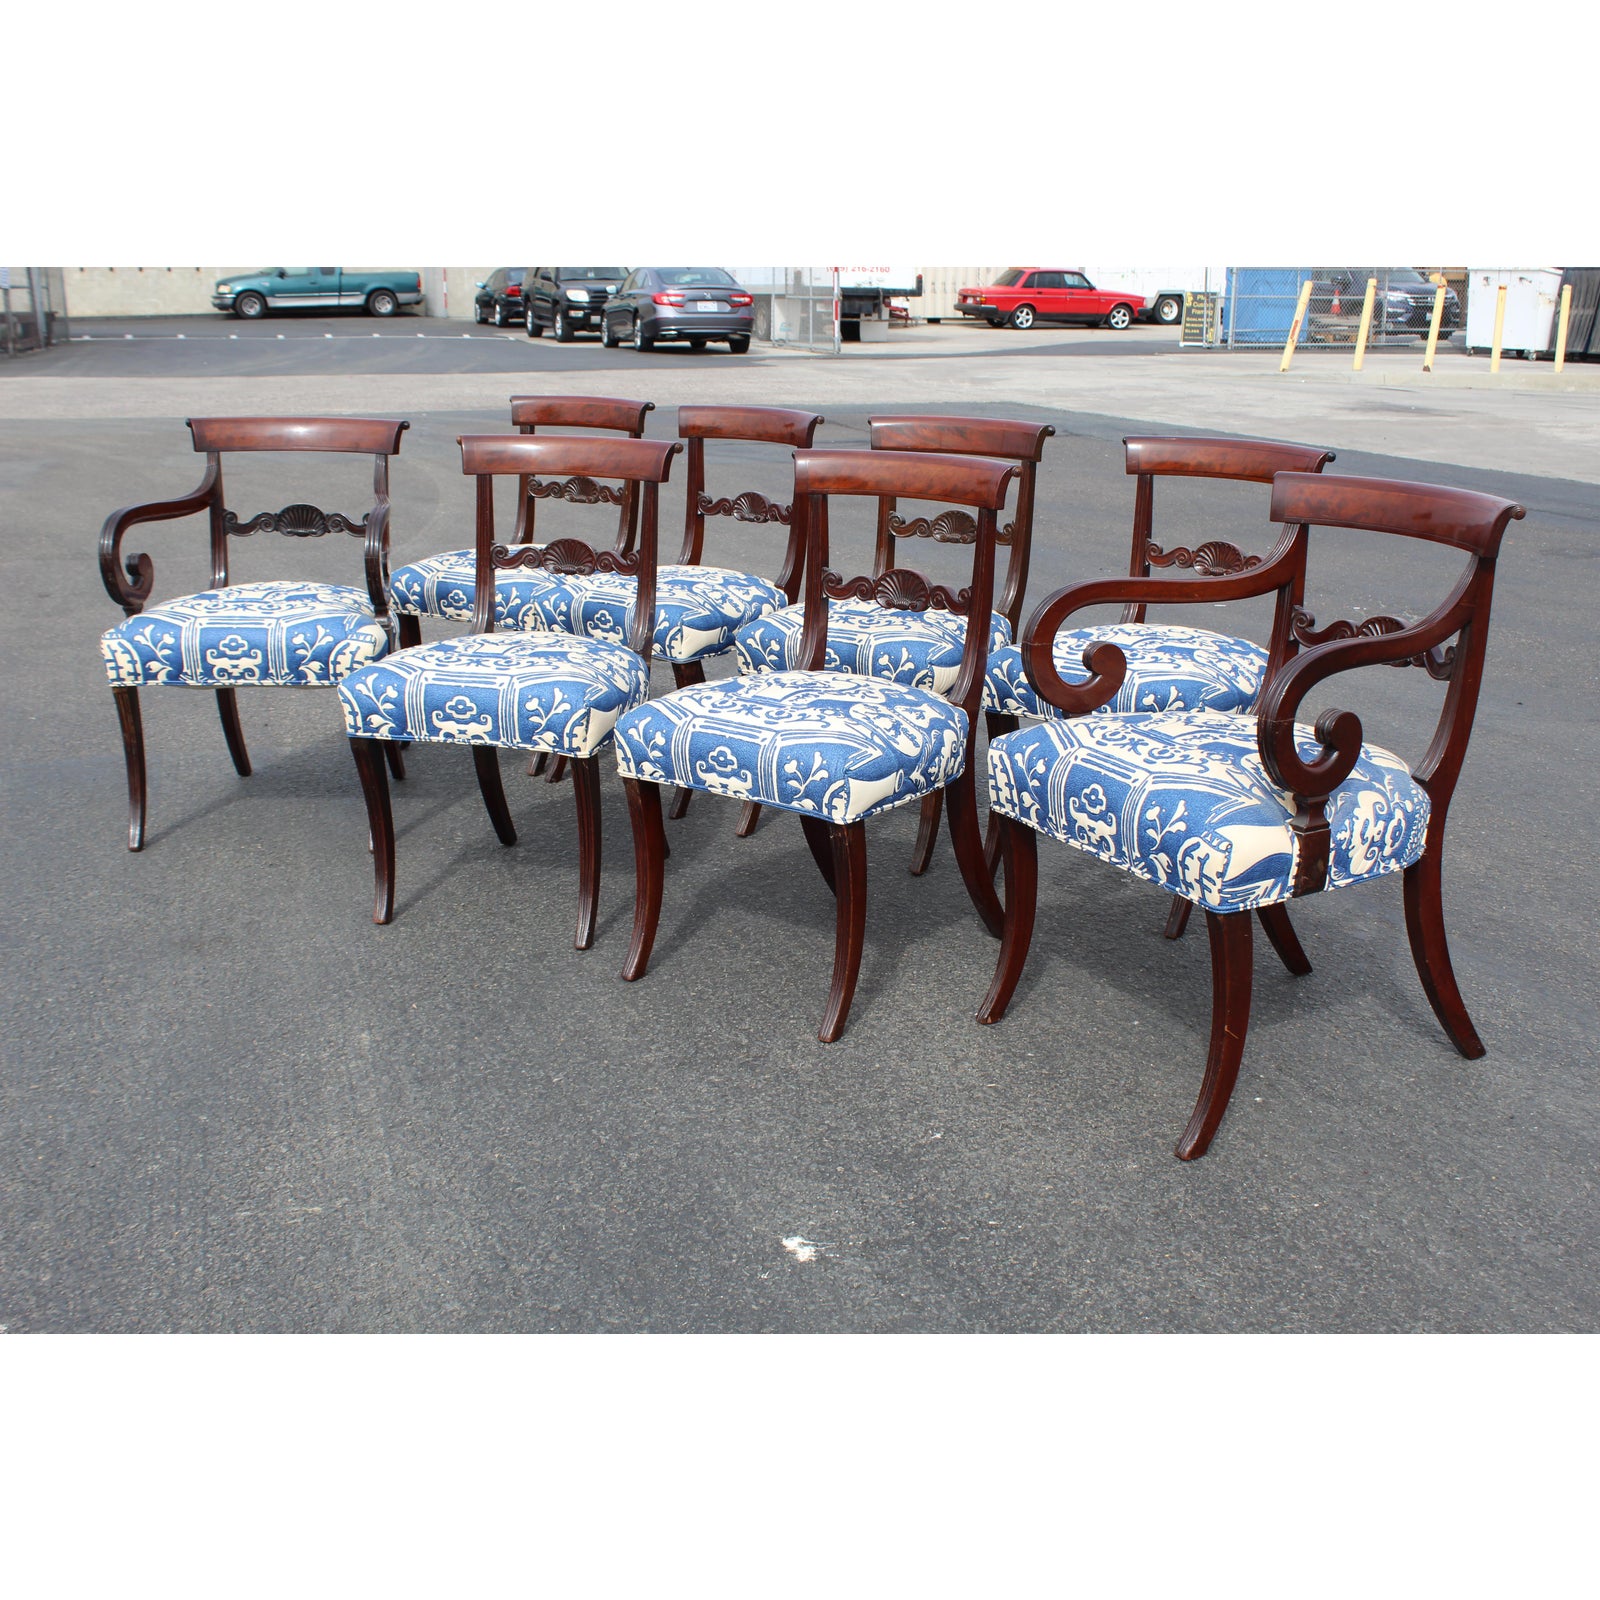 19th-century-english-regency-dining-chairs-set-of-8-8063